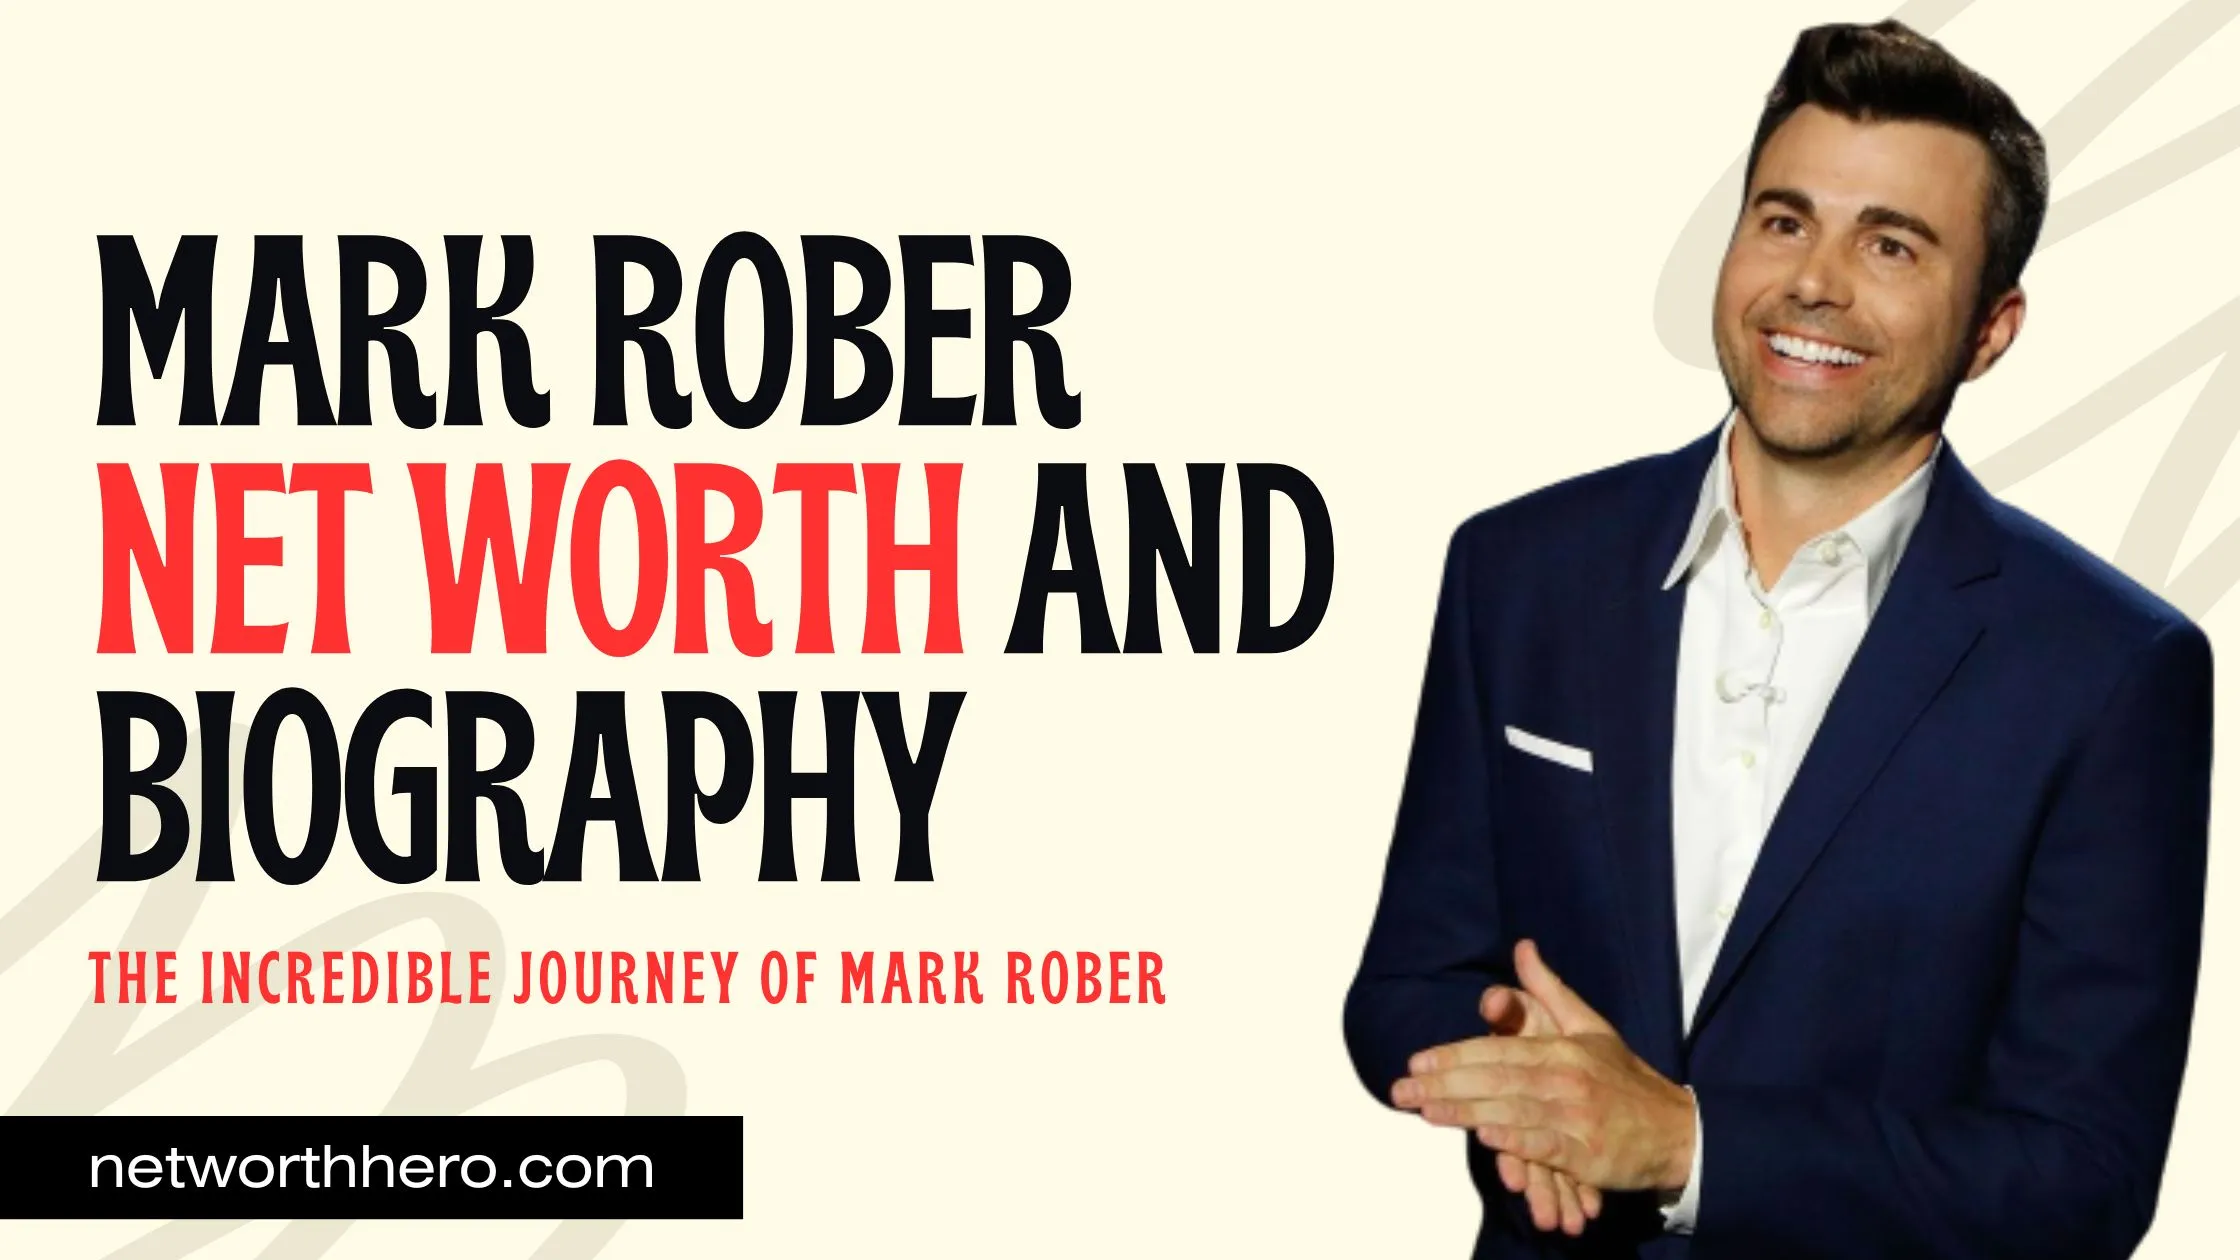 Mark Rober Net Wroth And Biography